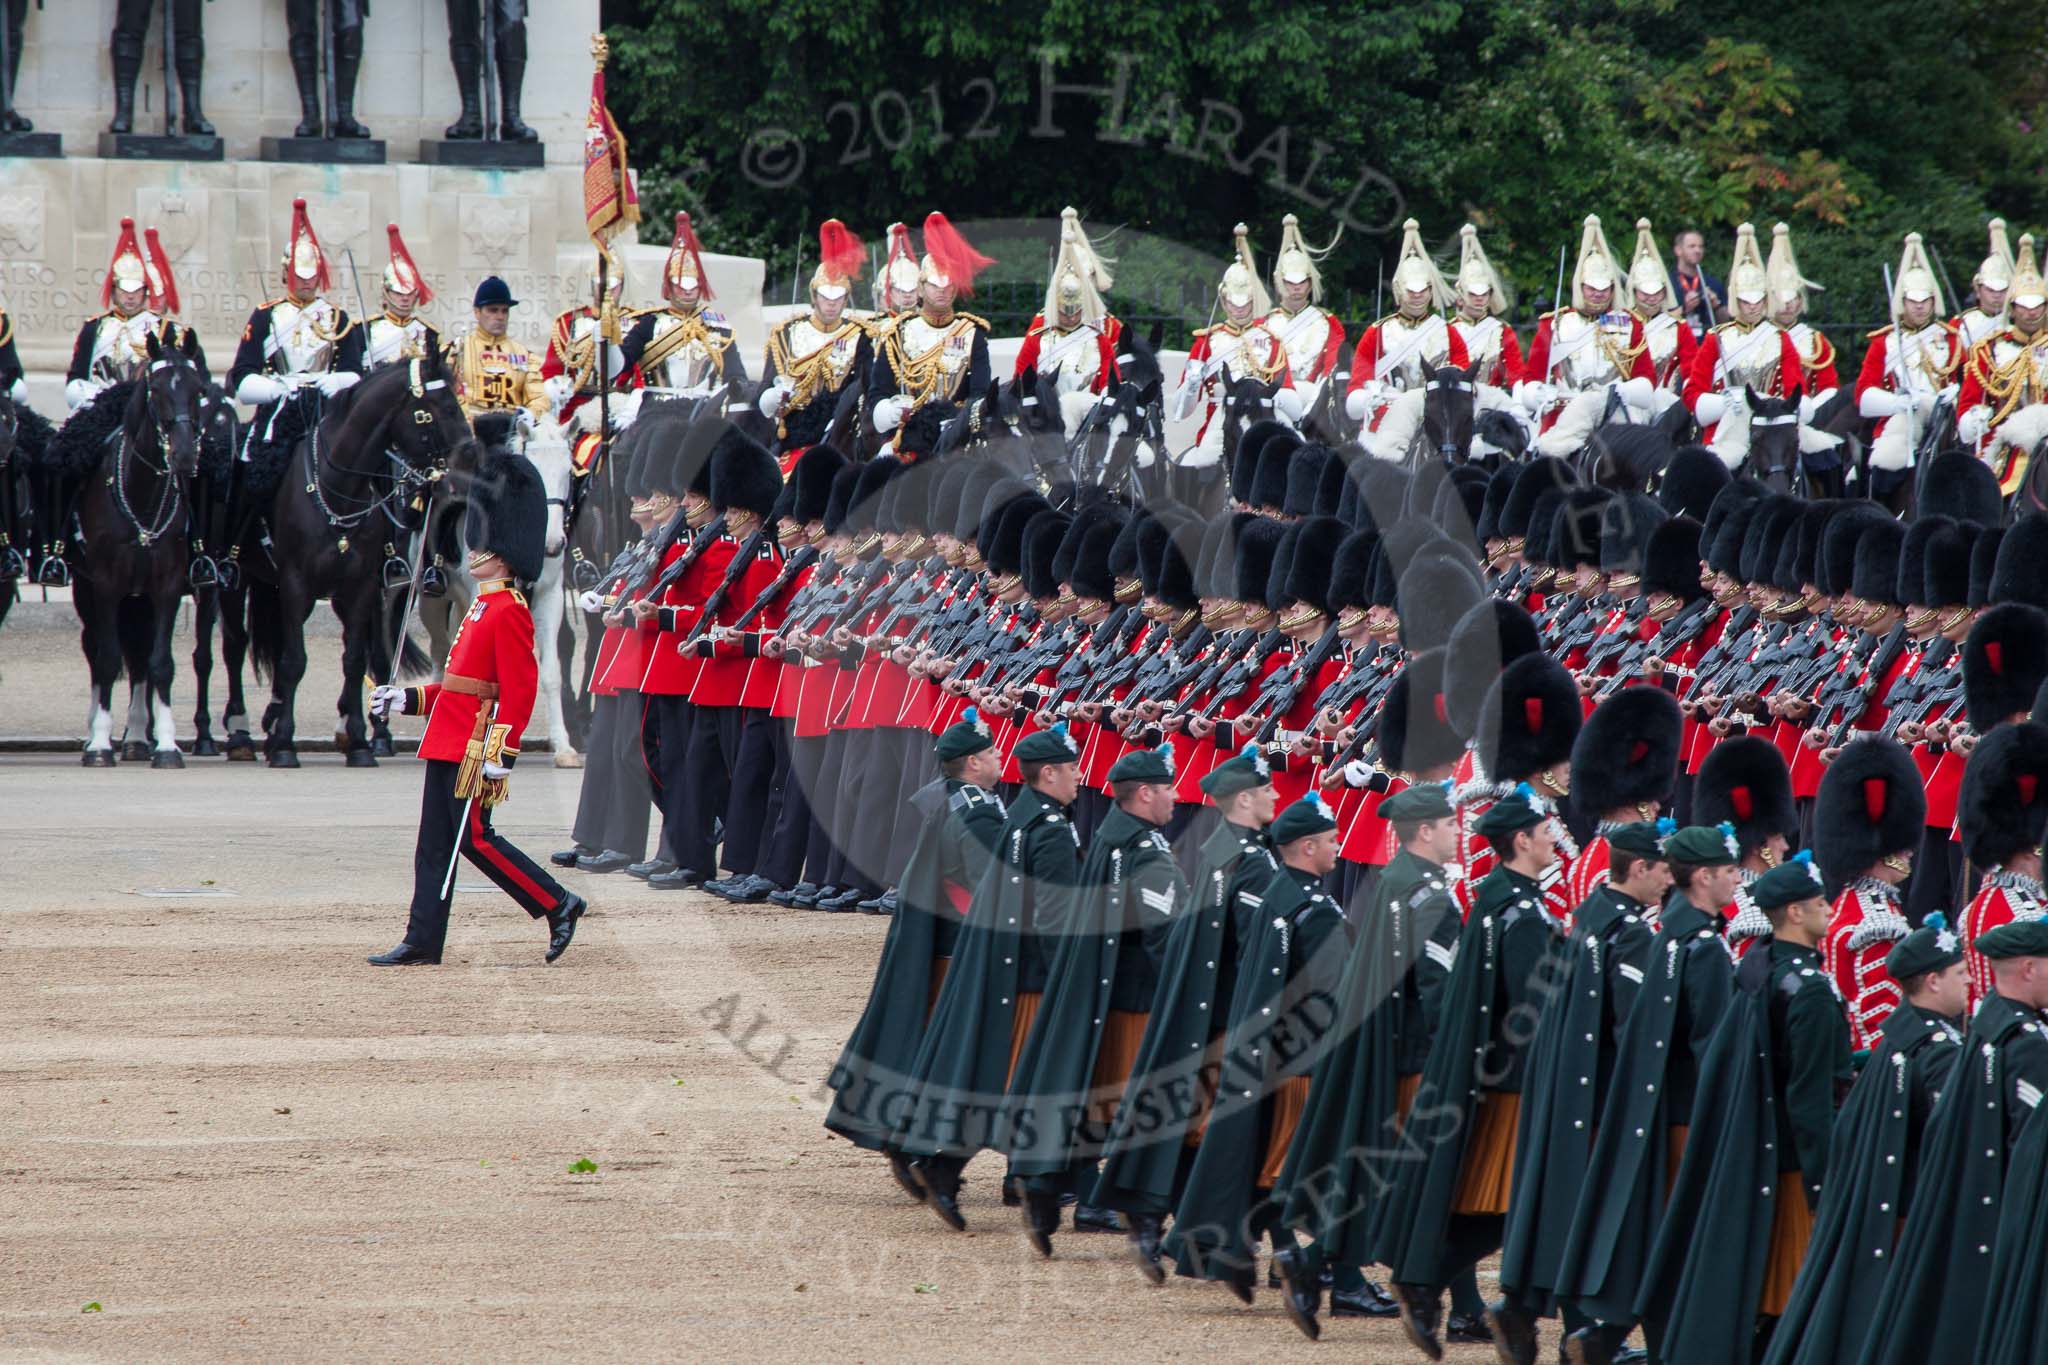 Trooping the Colour 2012: Elements of the parade - the Household Cavalry in front of the Guards Memorial, with the trumpeter, standard bearer, and standard coverer in the middle, in front of them No. 6 Guard, F Company Scots Guards, during the March Past, and in the foreground the Massed Bands..
Horse Guards Parade, Westminster,
London SW1,

United Kingdom,
on 16 June 2012 at 11:33, image #387